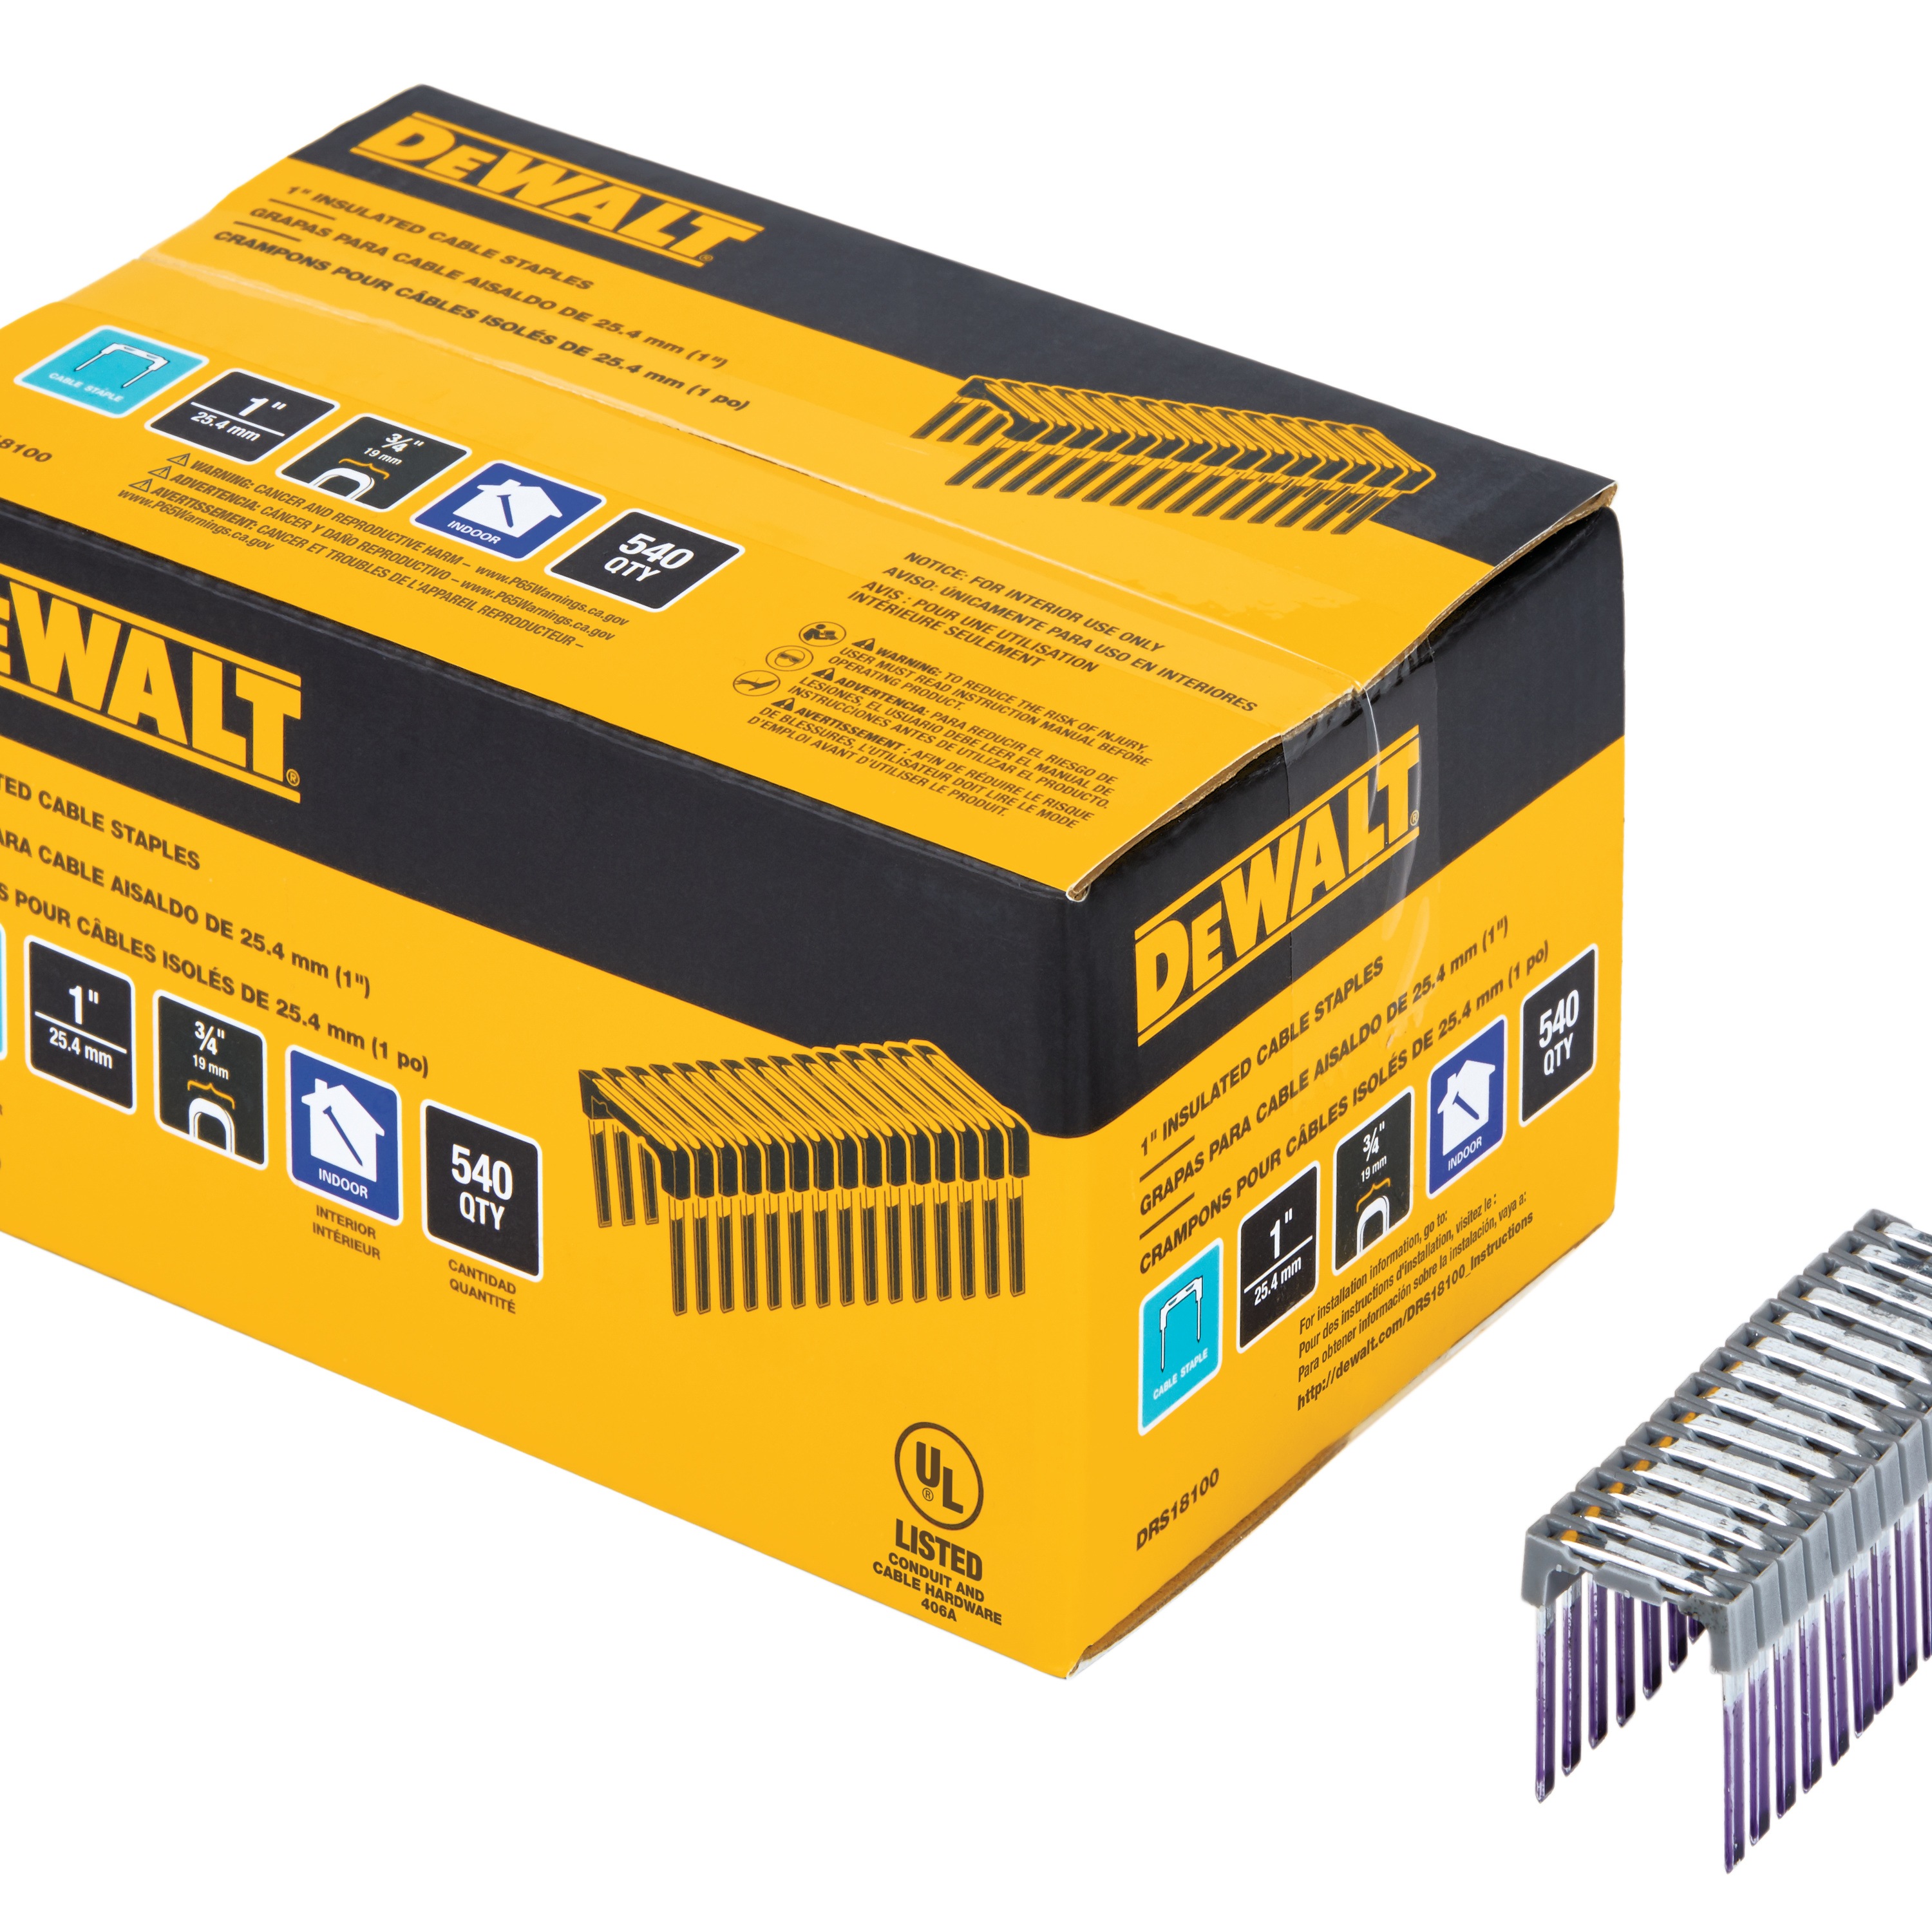 DEWALT - 1 Insulated Cable Staples - DRS18100